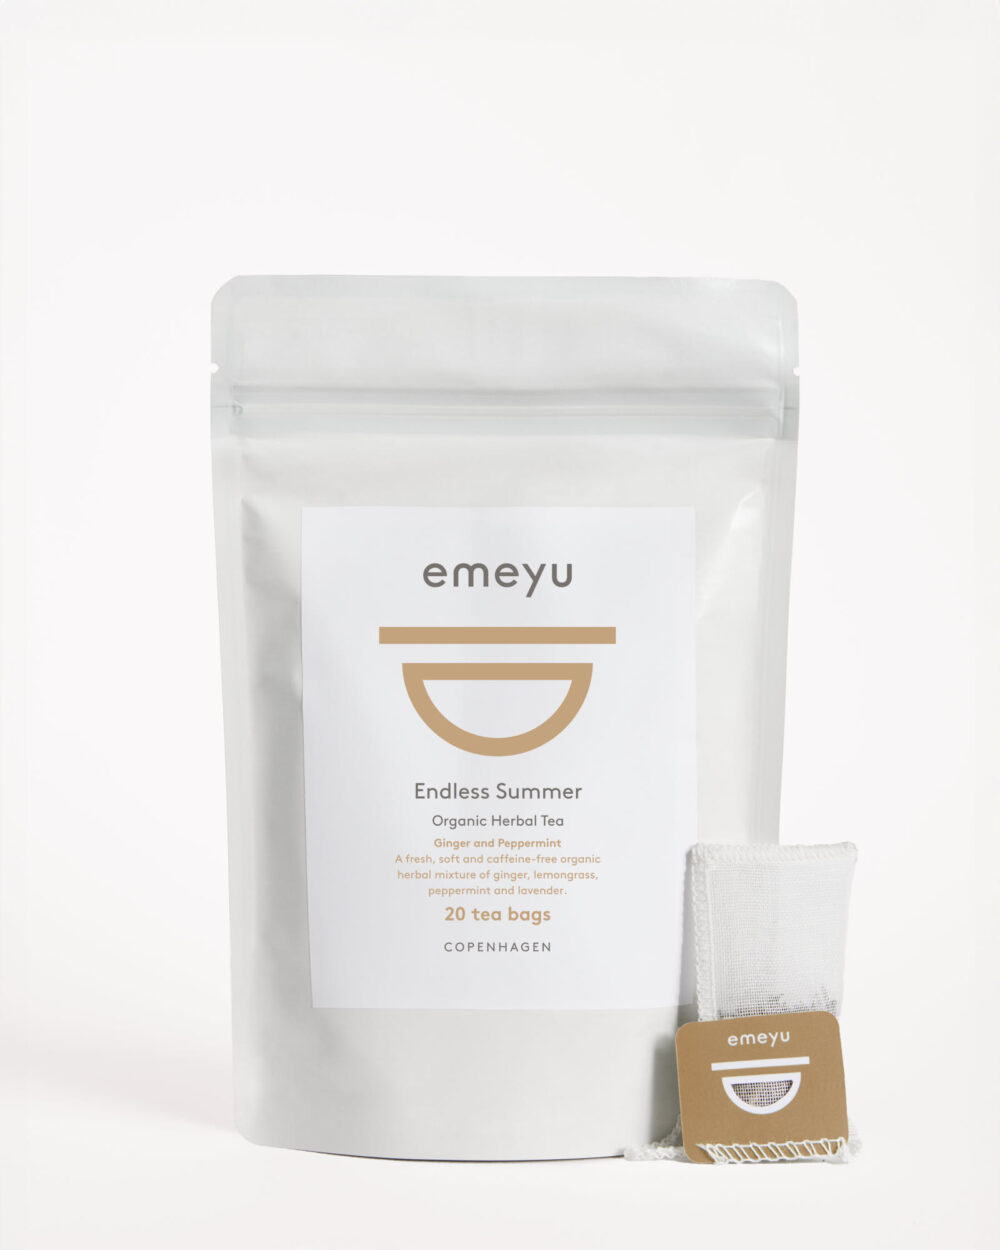 Endless Summer is an organic caffeine-free herbal tea with ginger, peppermint, lemongrass and lavender, 20 hand sewn cotton teabags.